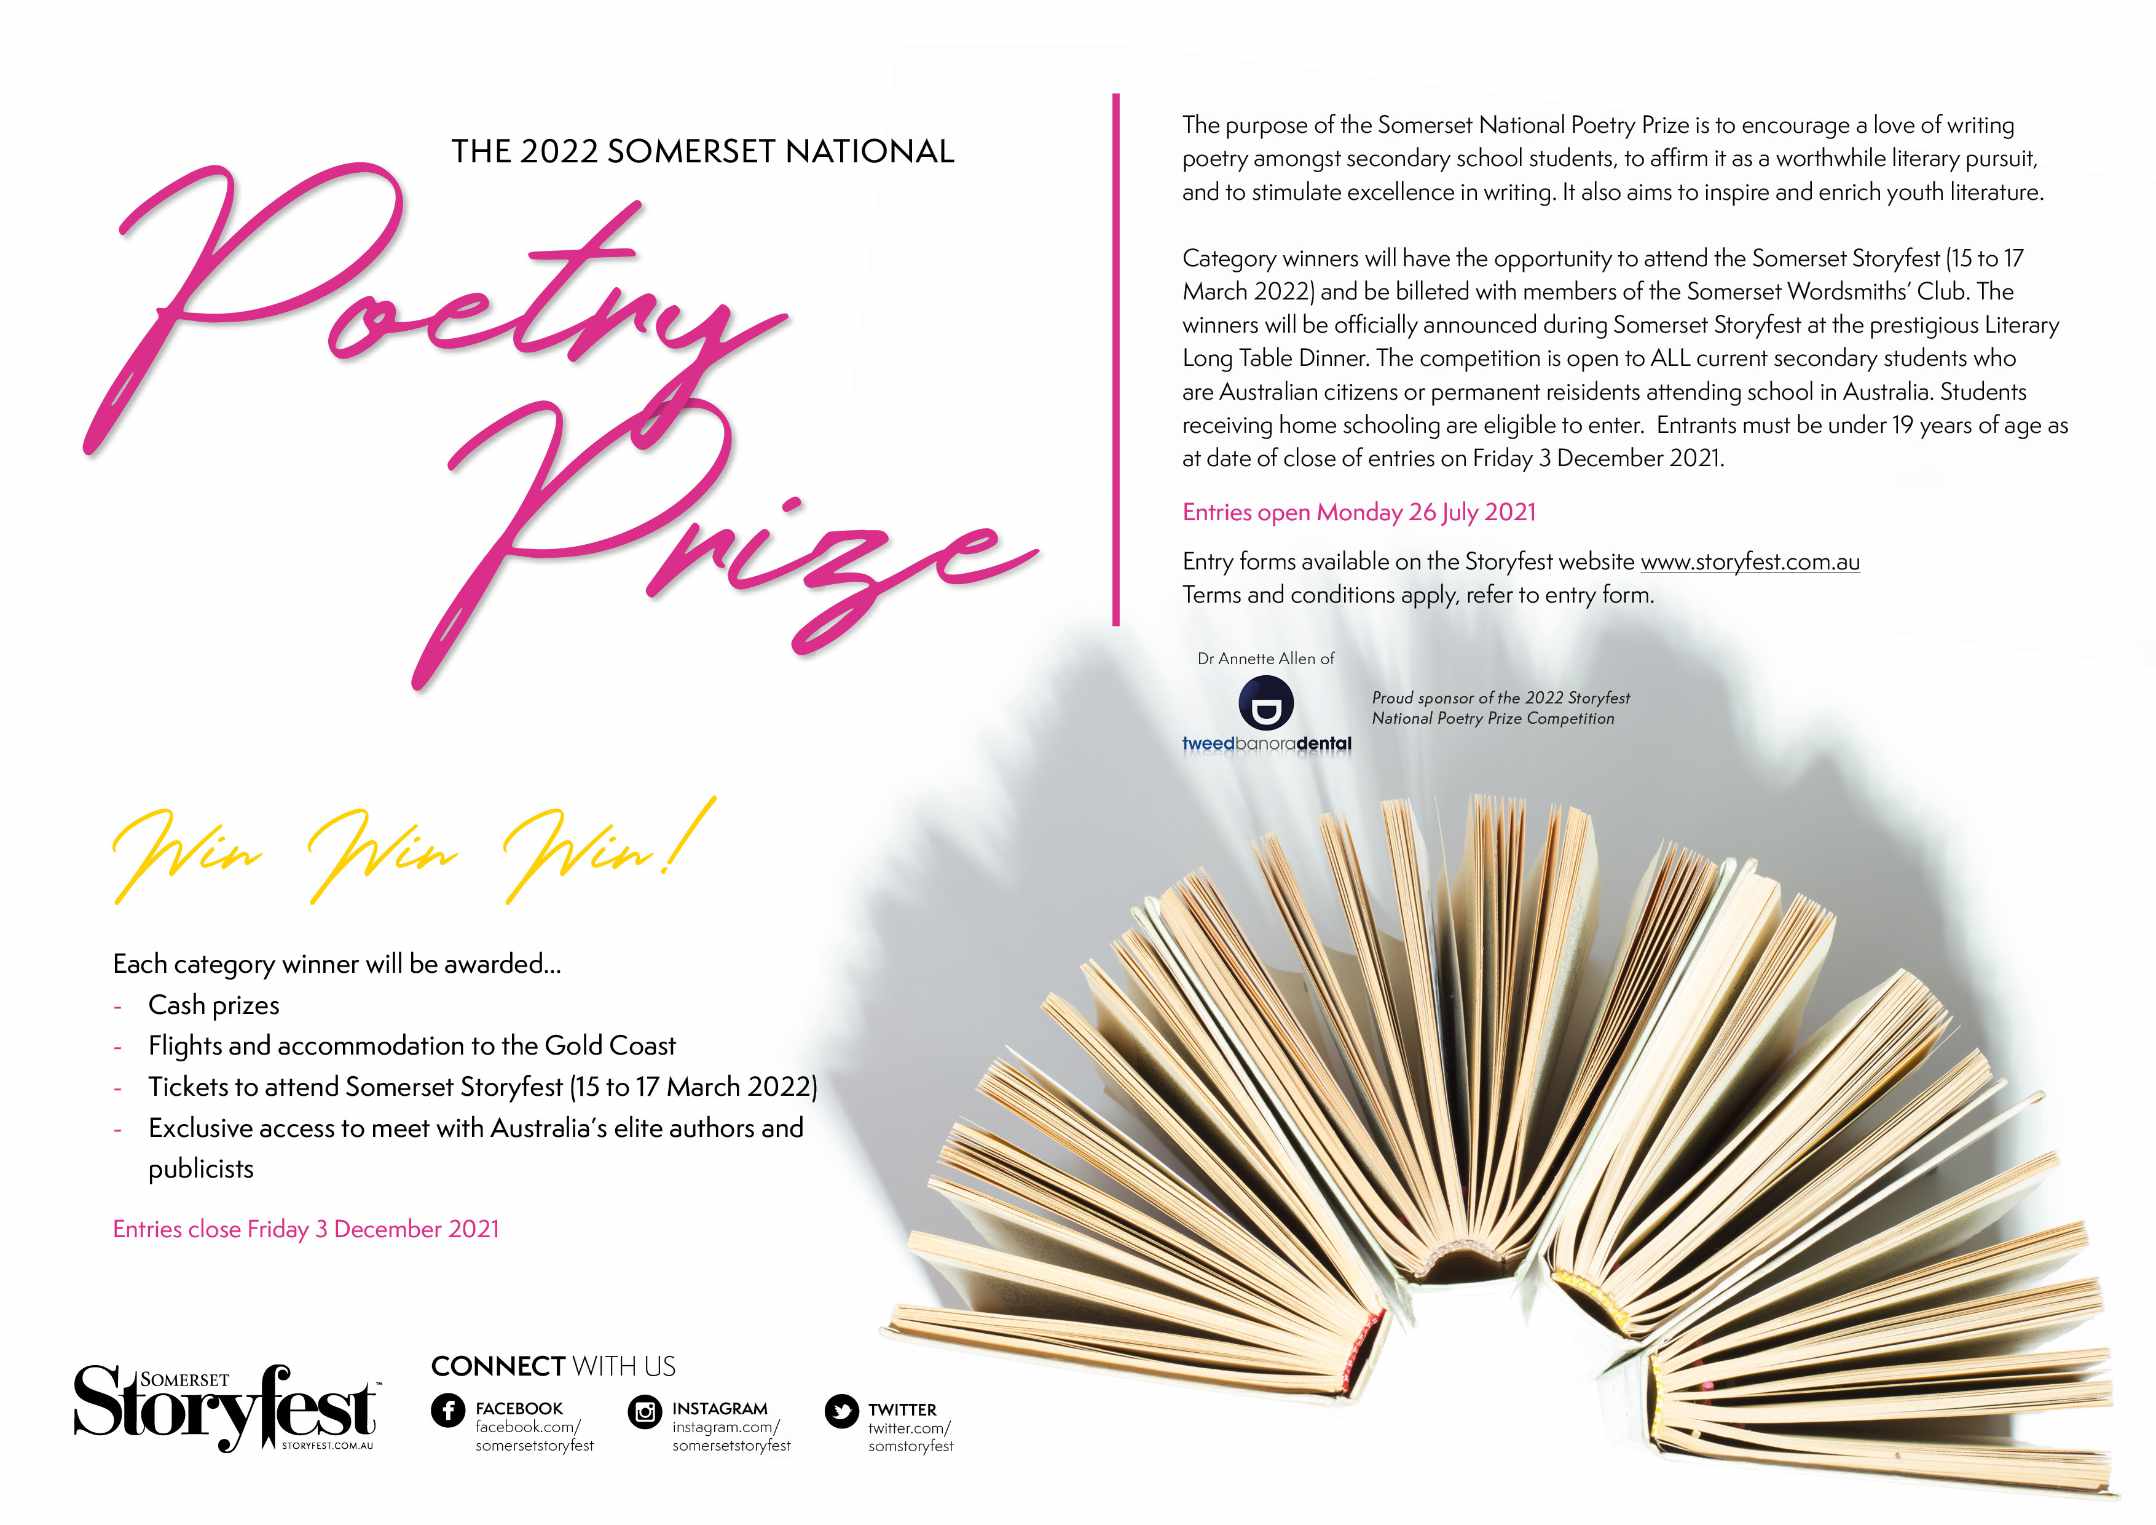 The Somerset National Poetry Prize